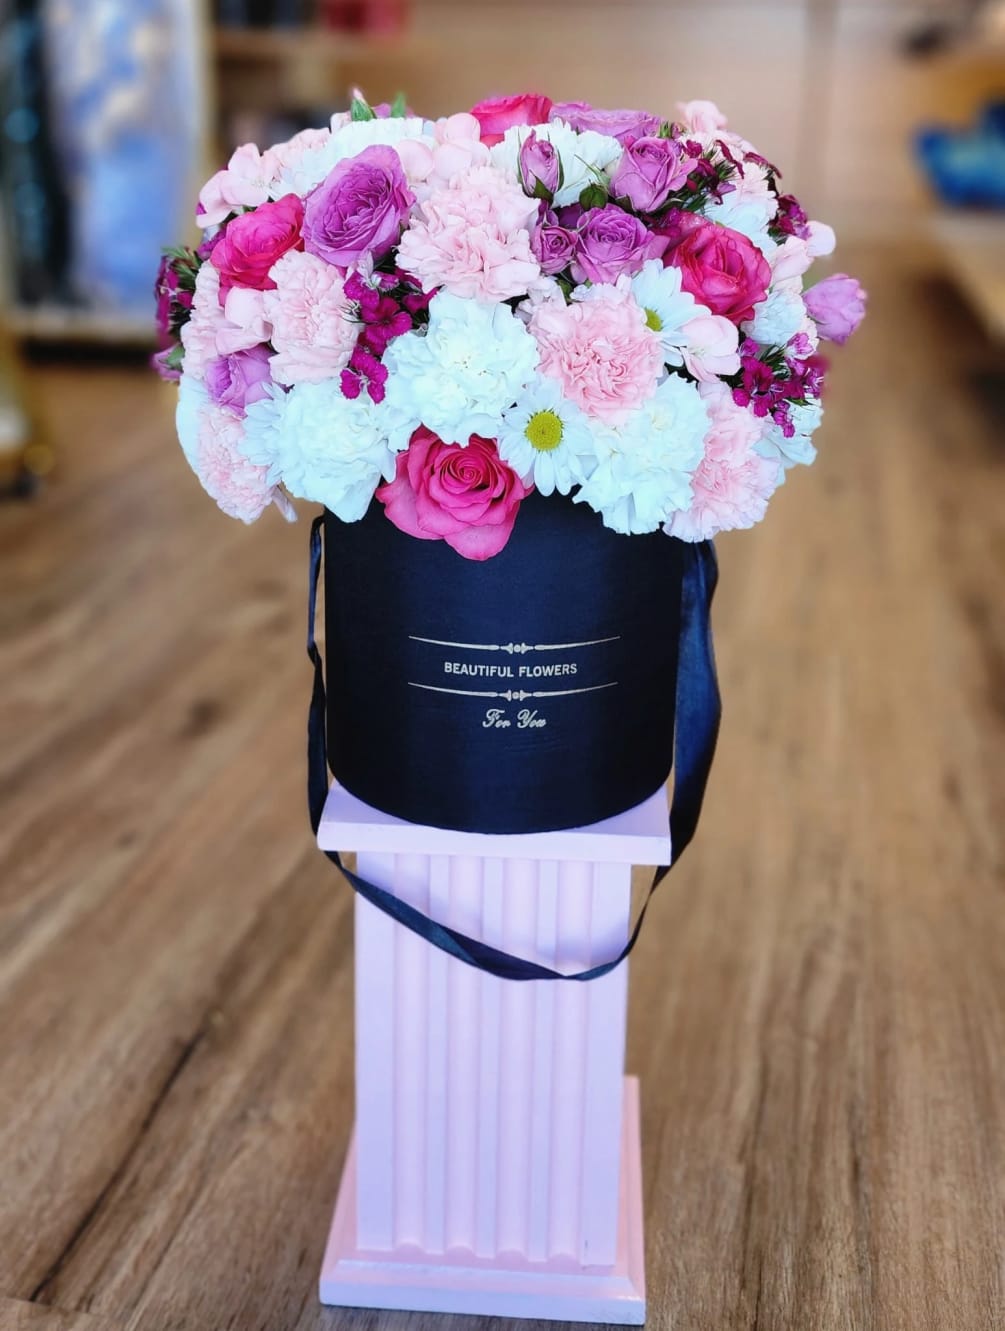 A wonderful cylindrical box filled with flowers for that special person in